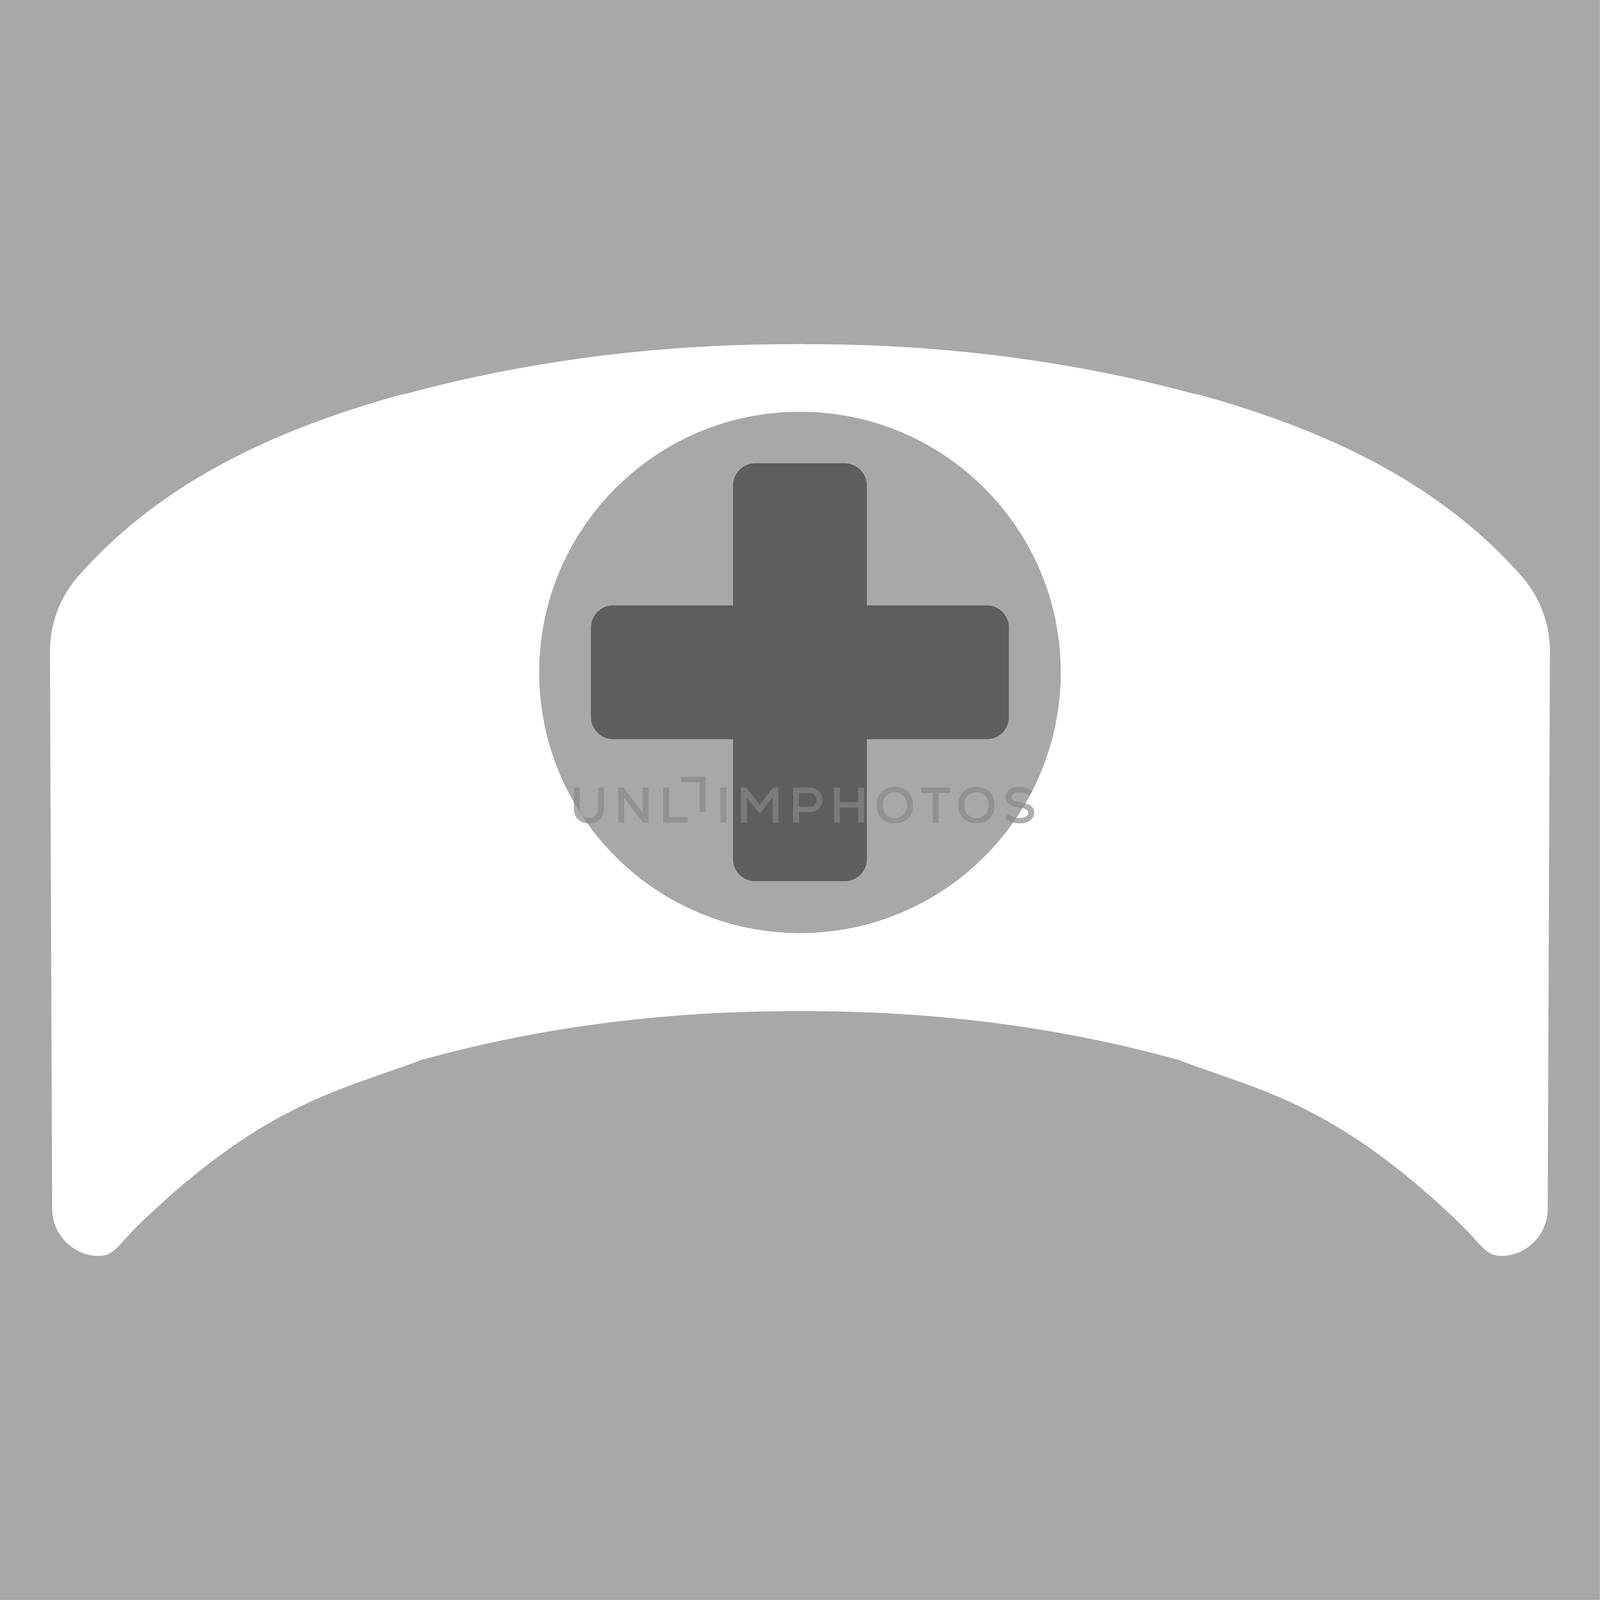 Doctor Cap raster icon. Style is bicolor flat symbol, dark gray and white colors, rounded angles, silver background.